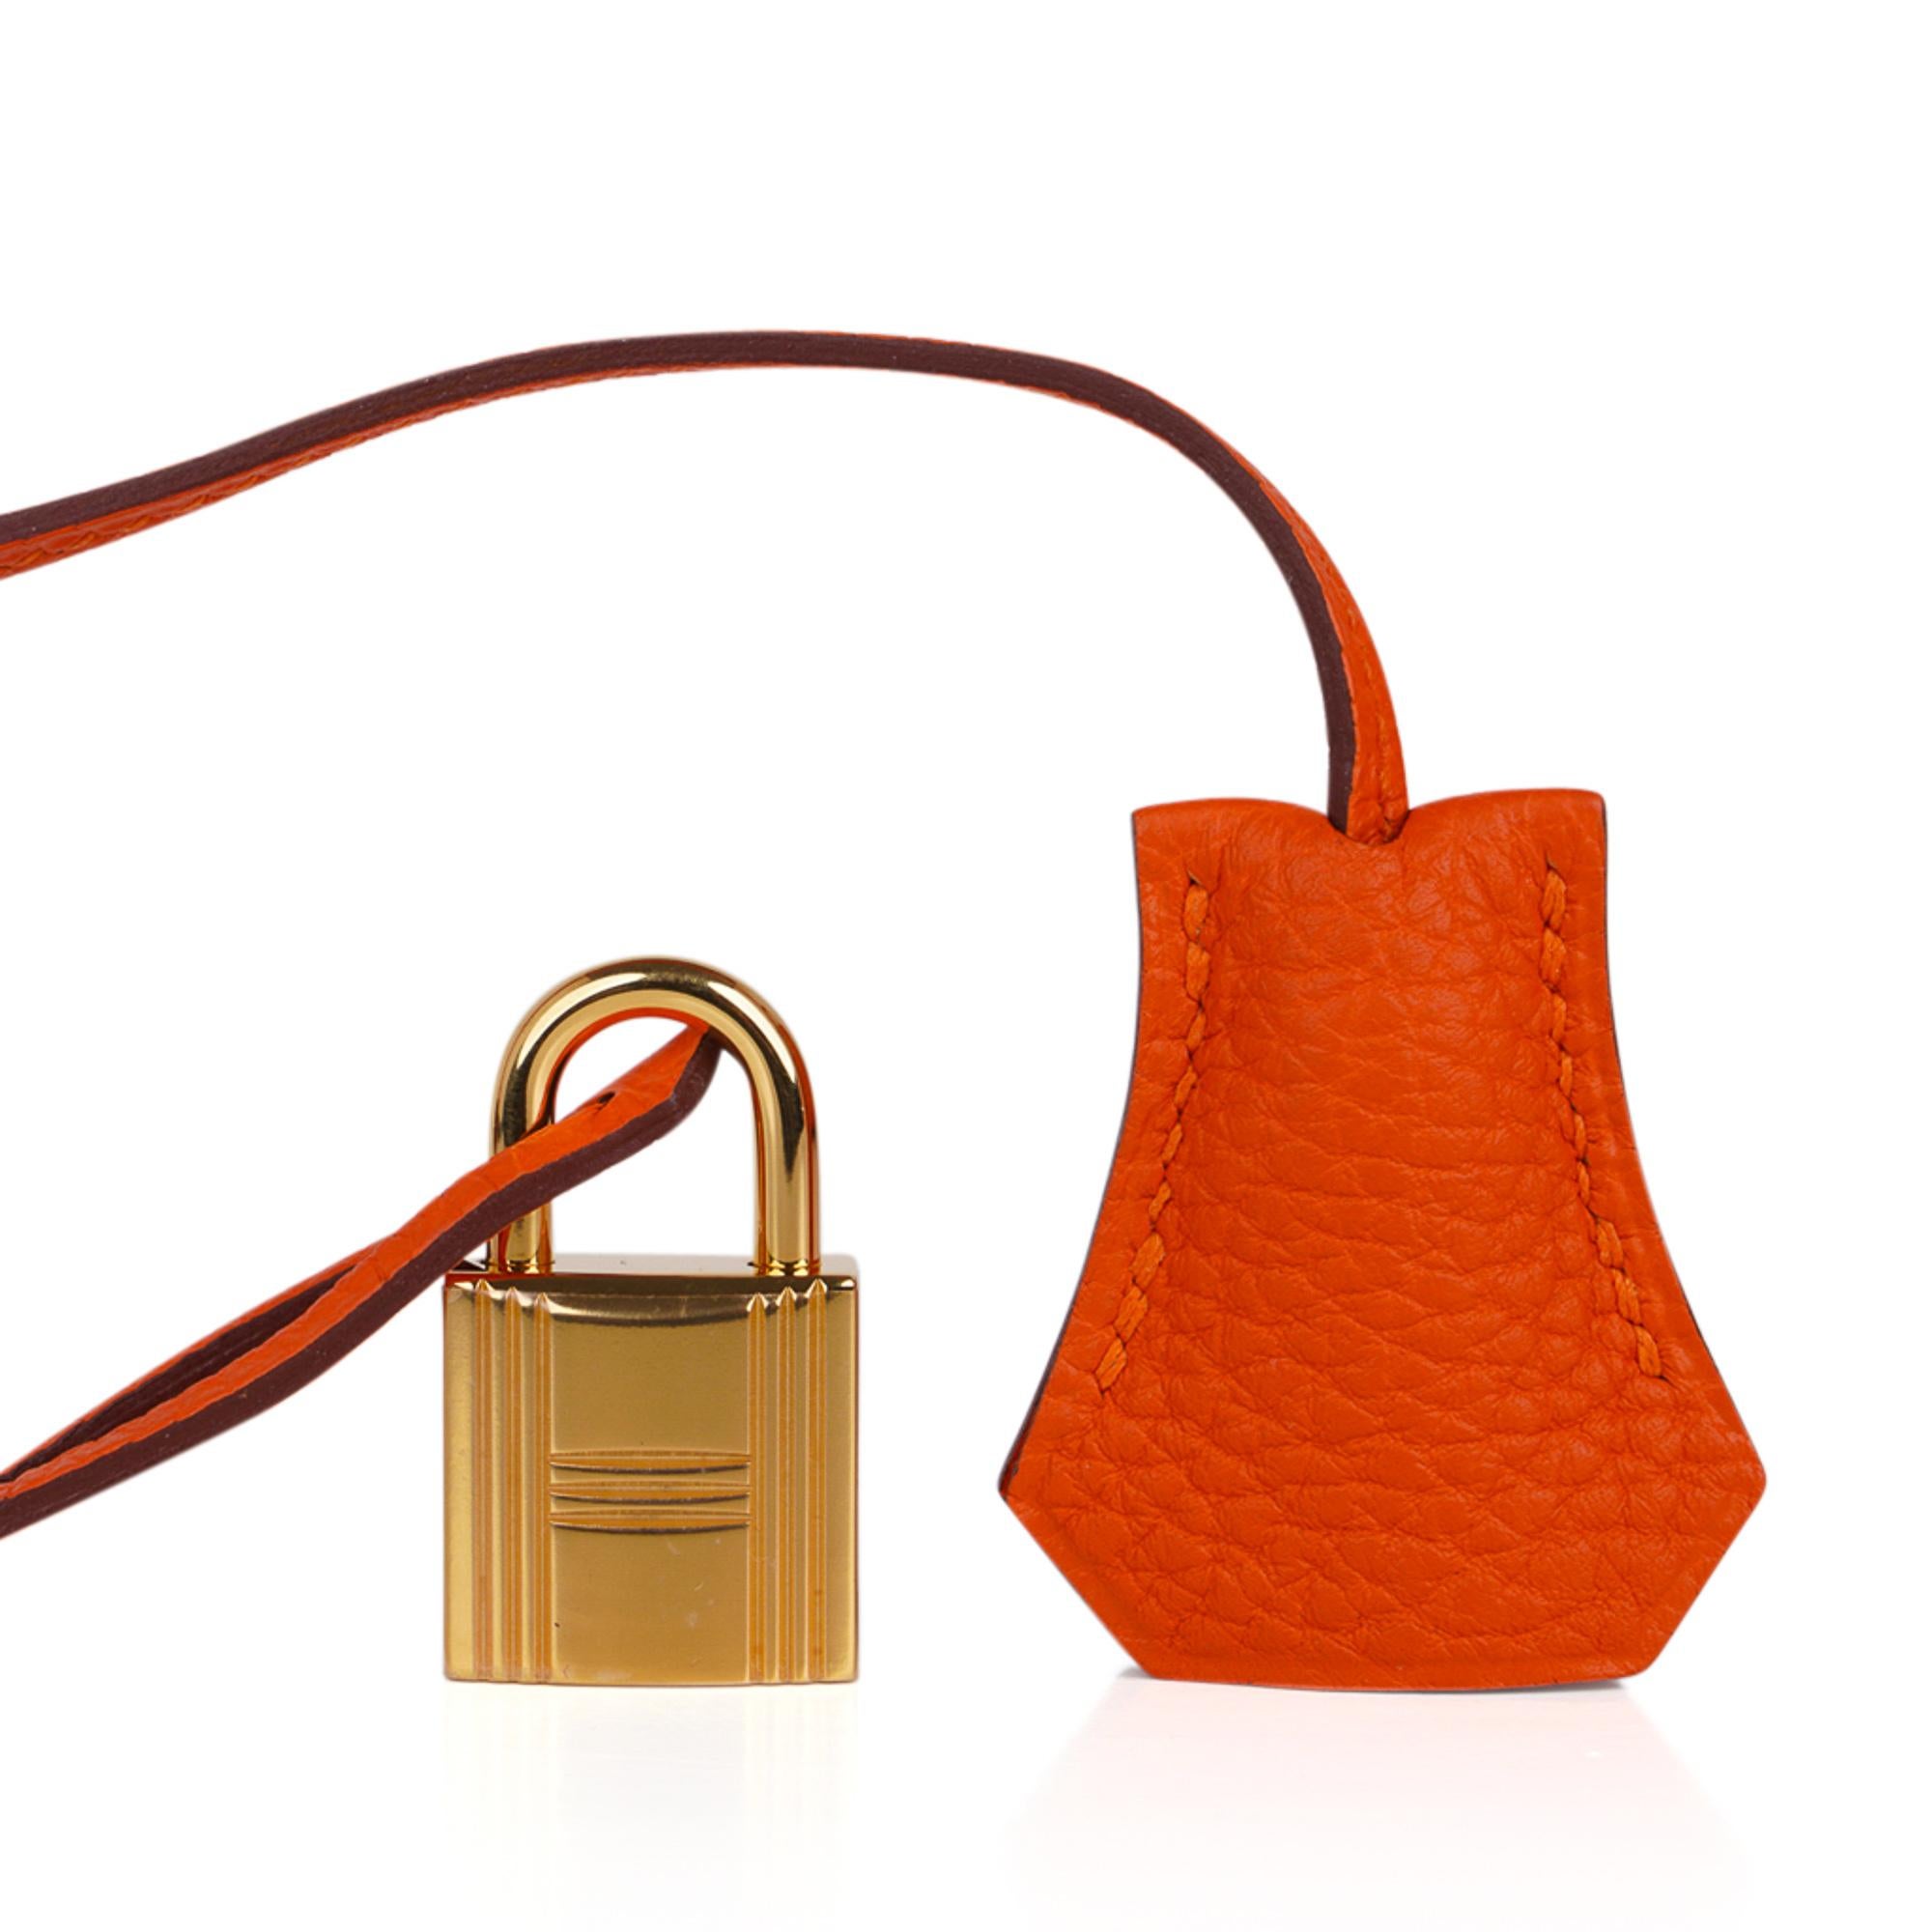 Mightychic offers a guaranteed authentic Hermes Birkin 35 bag featured in Feu Orange - a fresh take on the iconic classic.
Rich with gold hardware.
Hermes leather in Togo is textured to be scratch resistant.
This classic orange Birkin bag is the